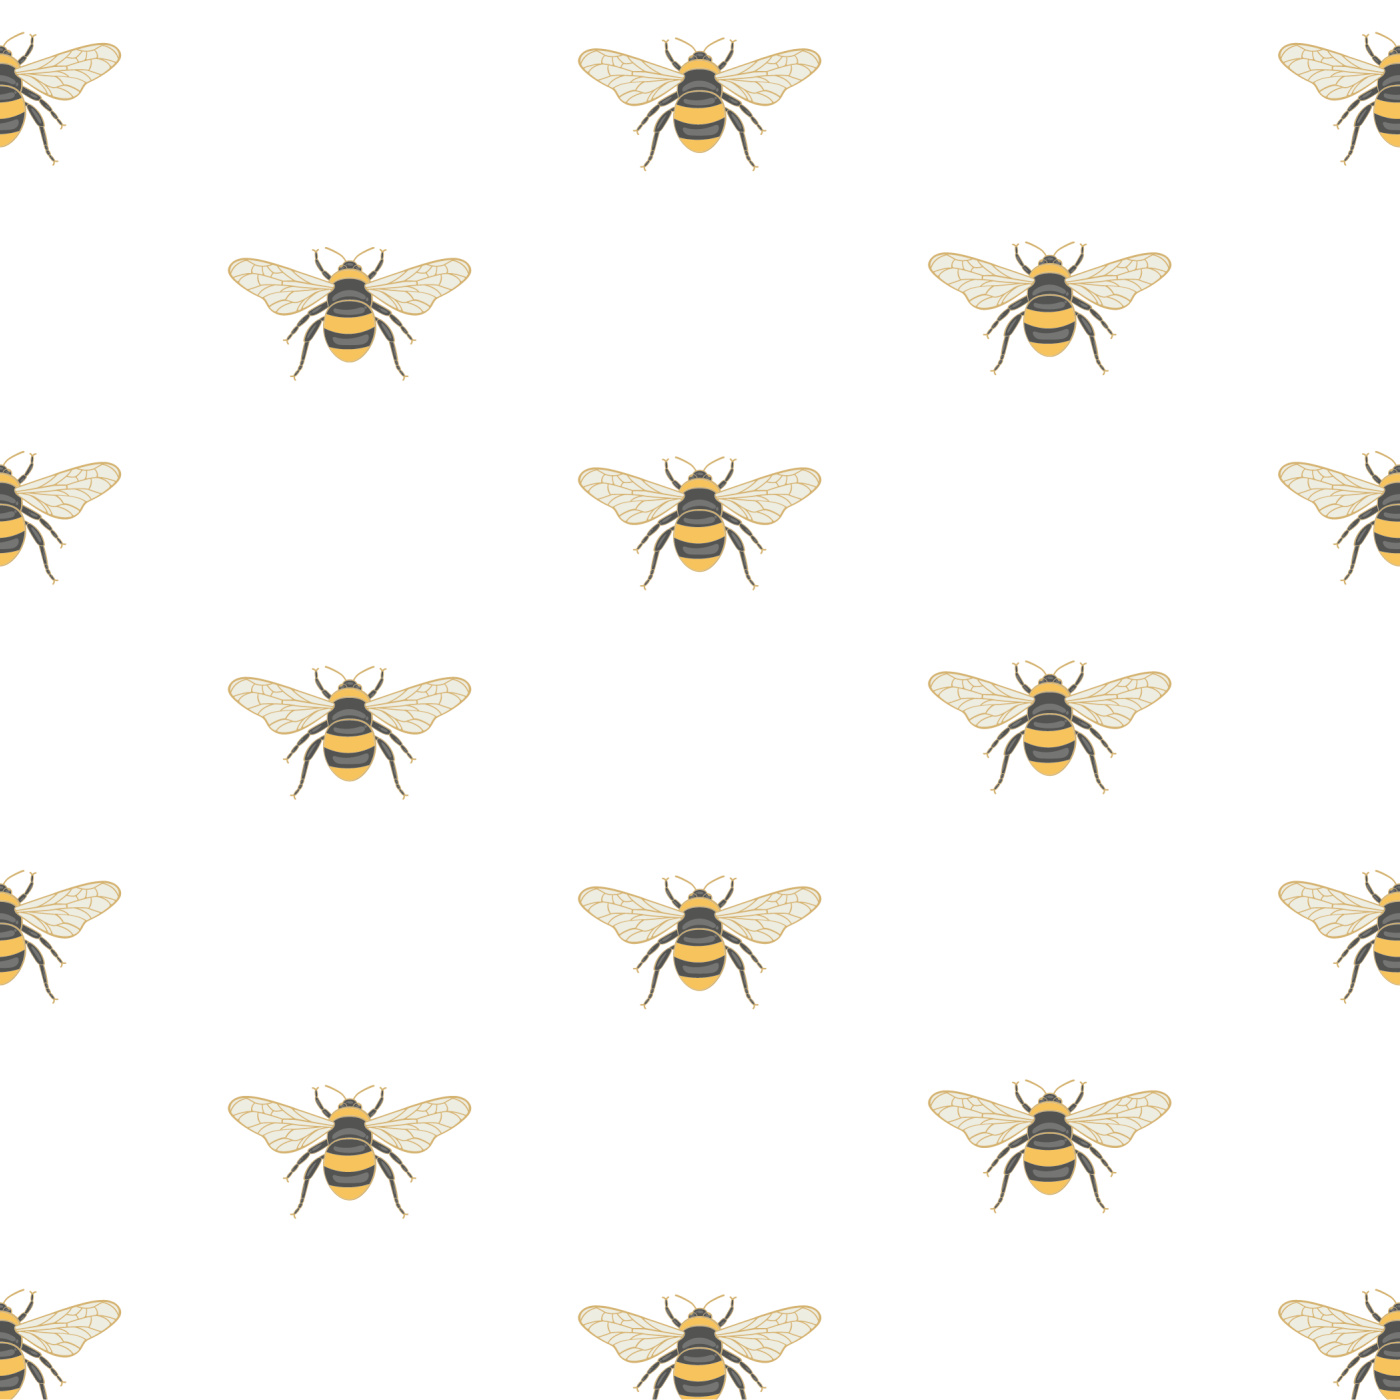 Buzzy Bees wallpaper in white  I Love Wallpaper